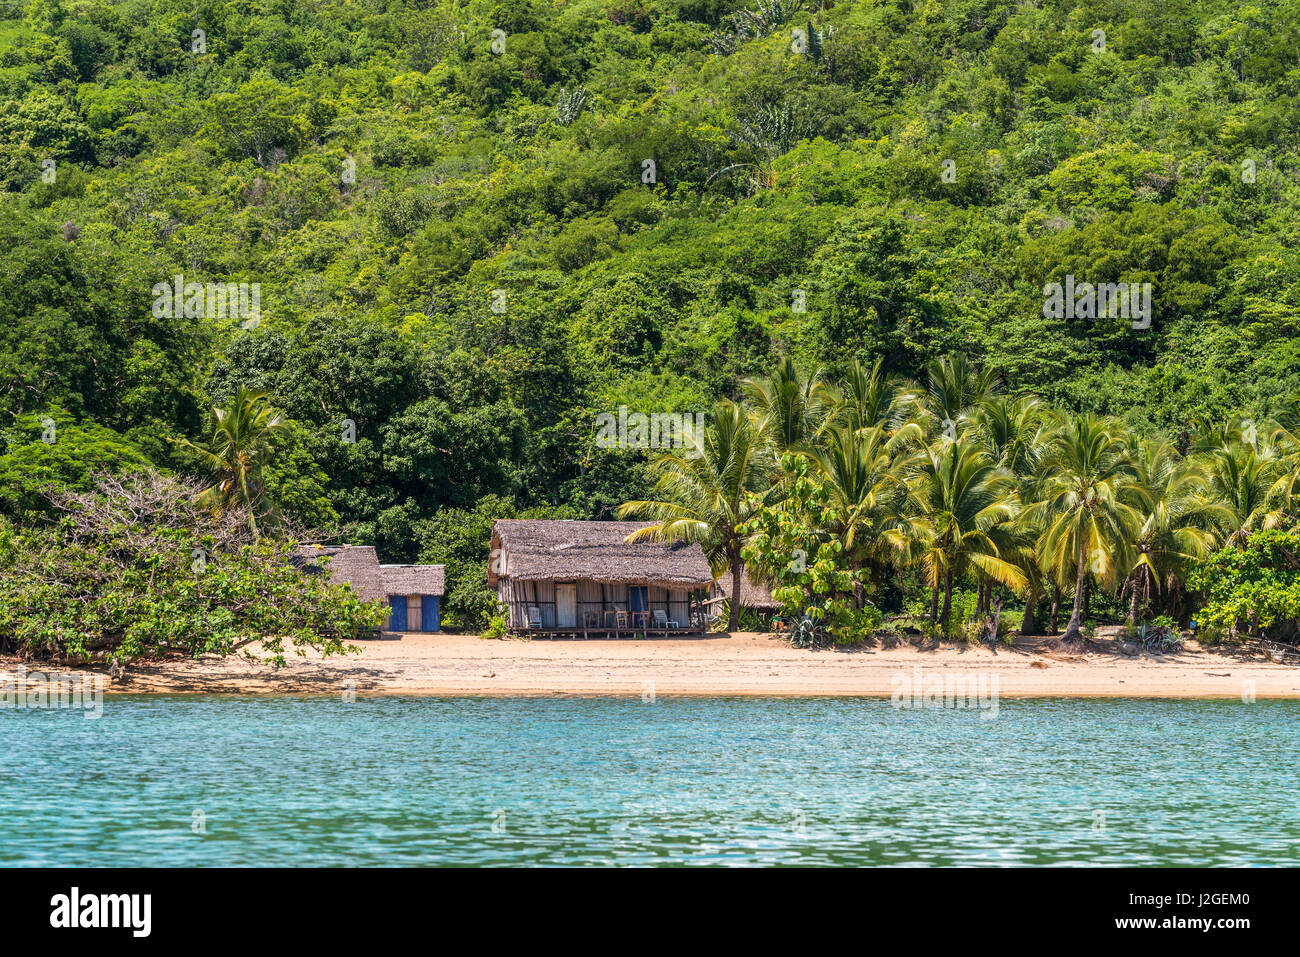 Nosy Be, Madagascar - December 19, 2015: Lokobe Strict Reserve beach view in Nosy Be, Madagascar. It is known for its black lemurs and the beautiful N Stock Photo